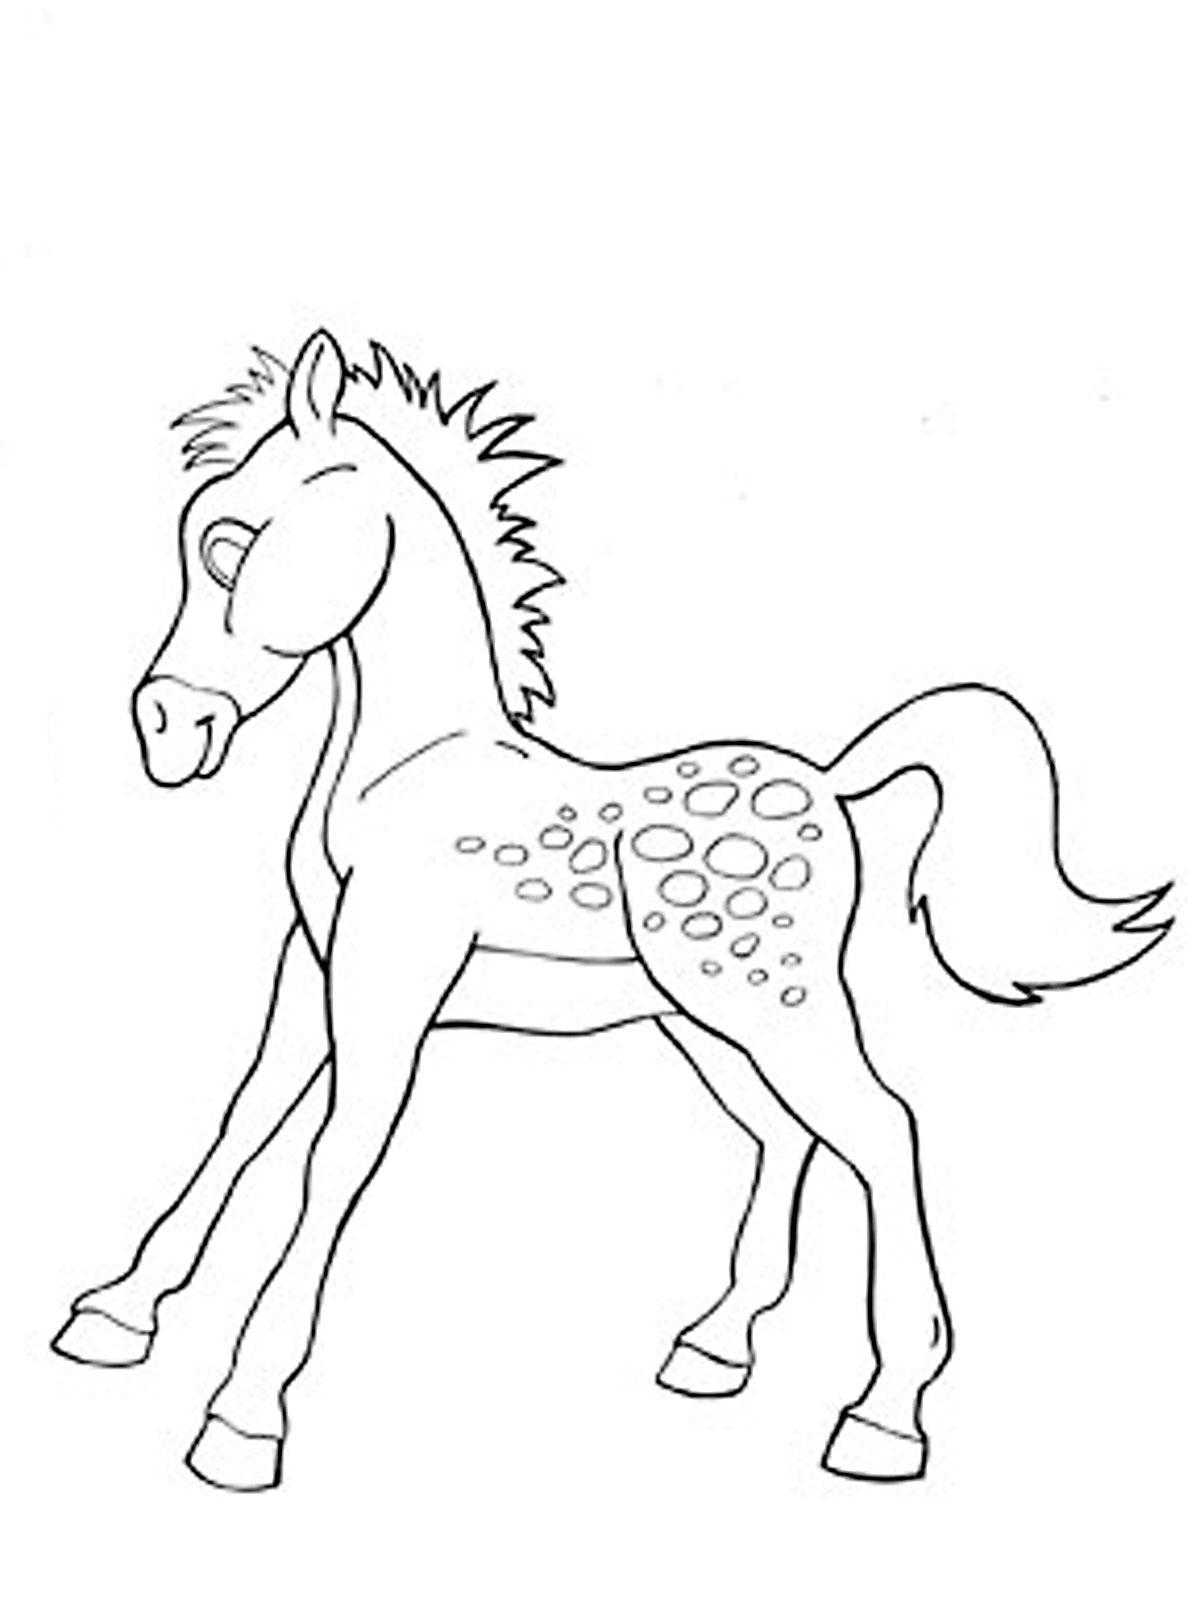 Coloring Horse. Category Pets allowed. Tags:  the horse .